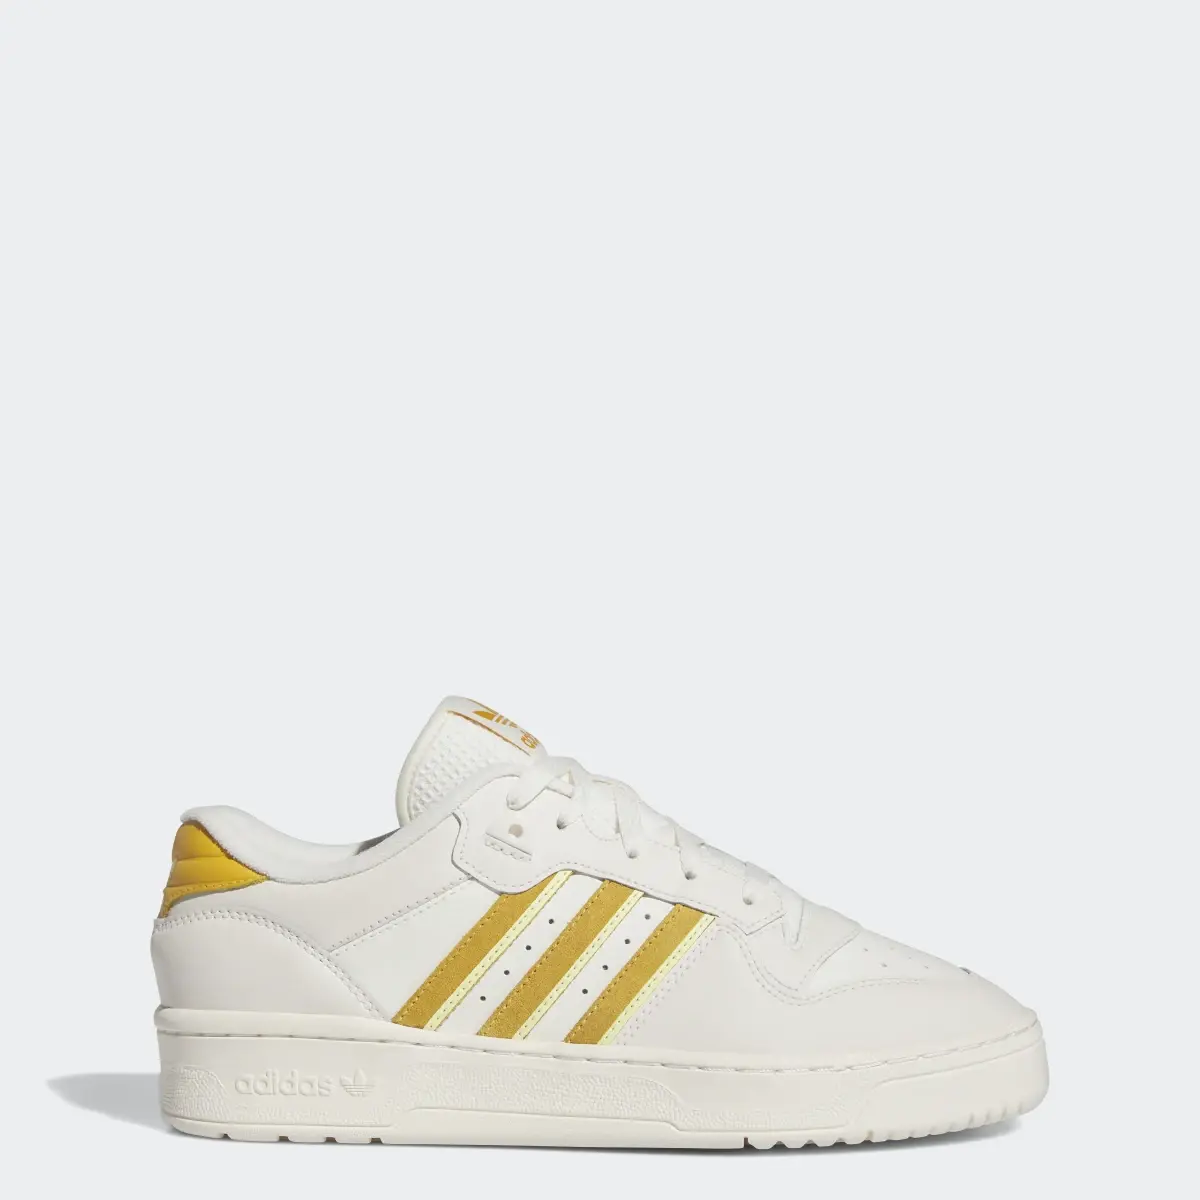 Adidas Chaussure Rivalry Low. 1